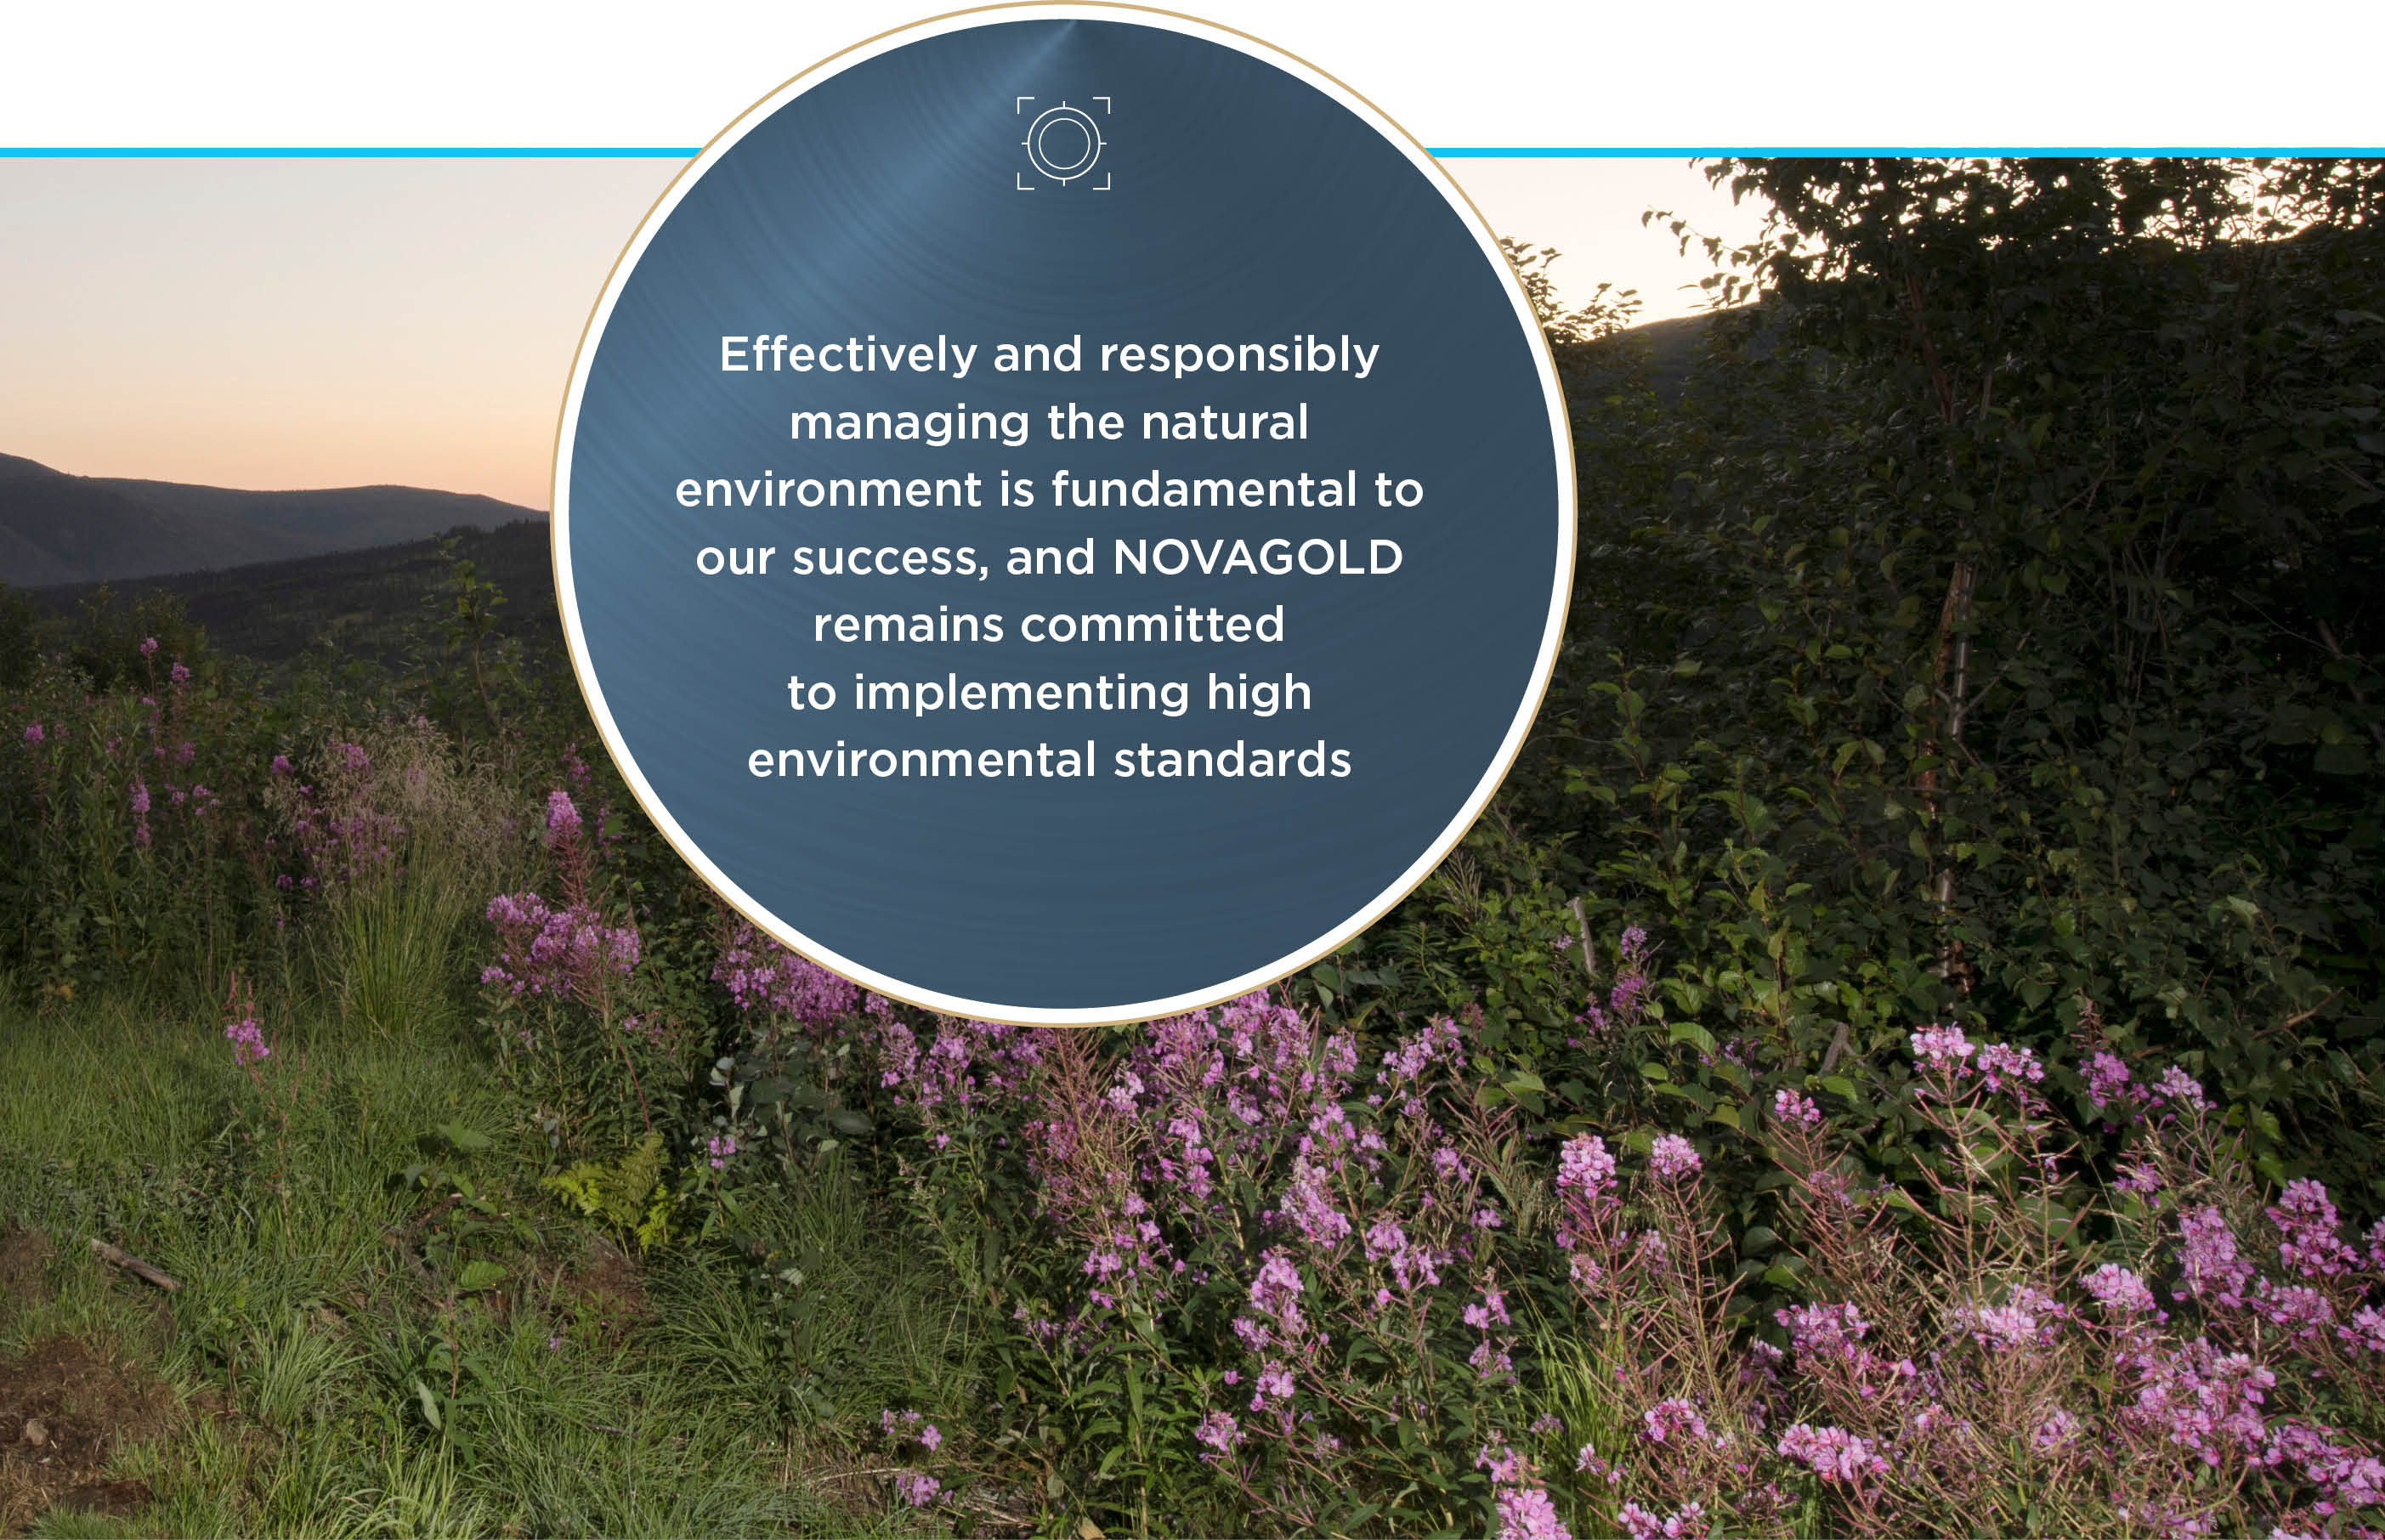 NOVAGOLD’s Commitments to the Environment